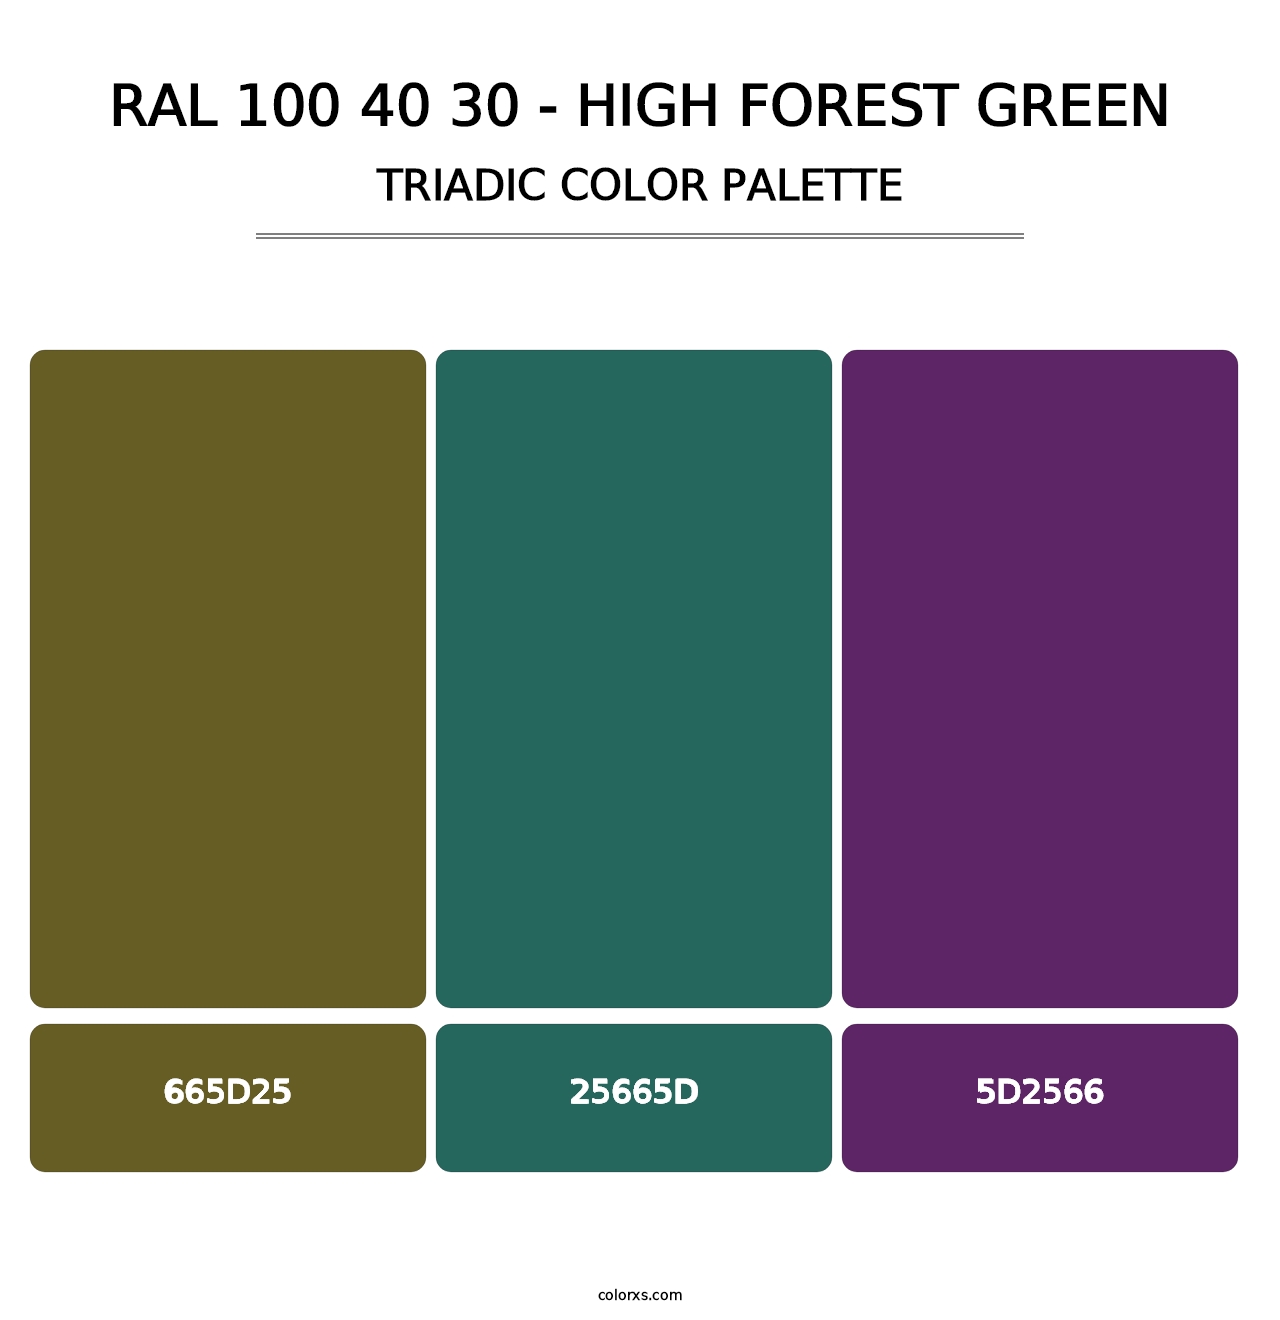 RAL 100 40 30 - High Forest Green - Triadic Color Palette